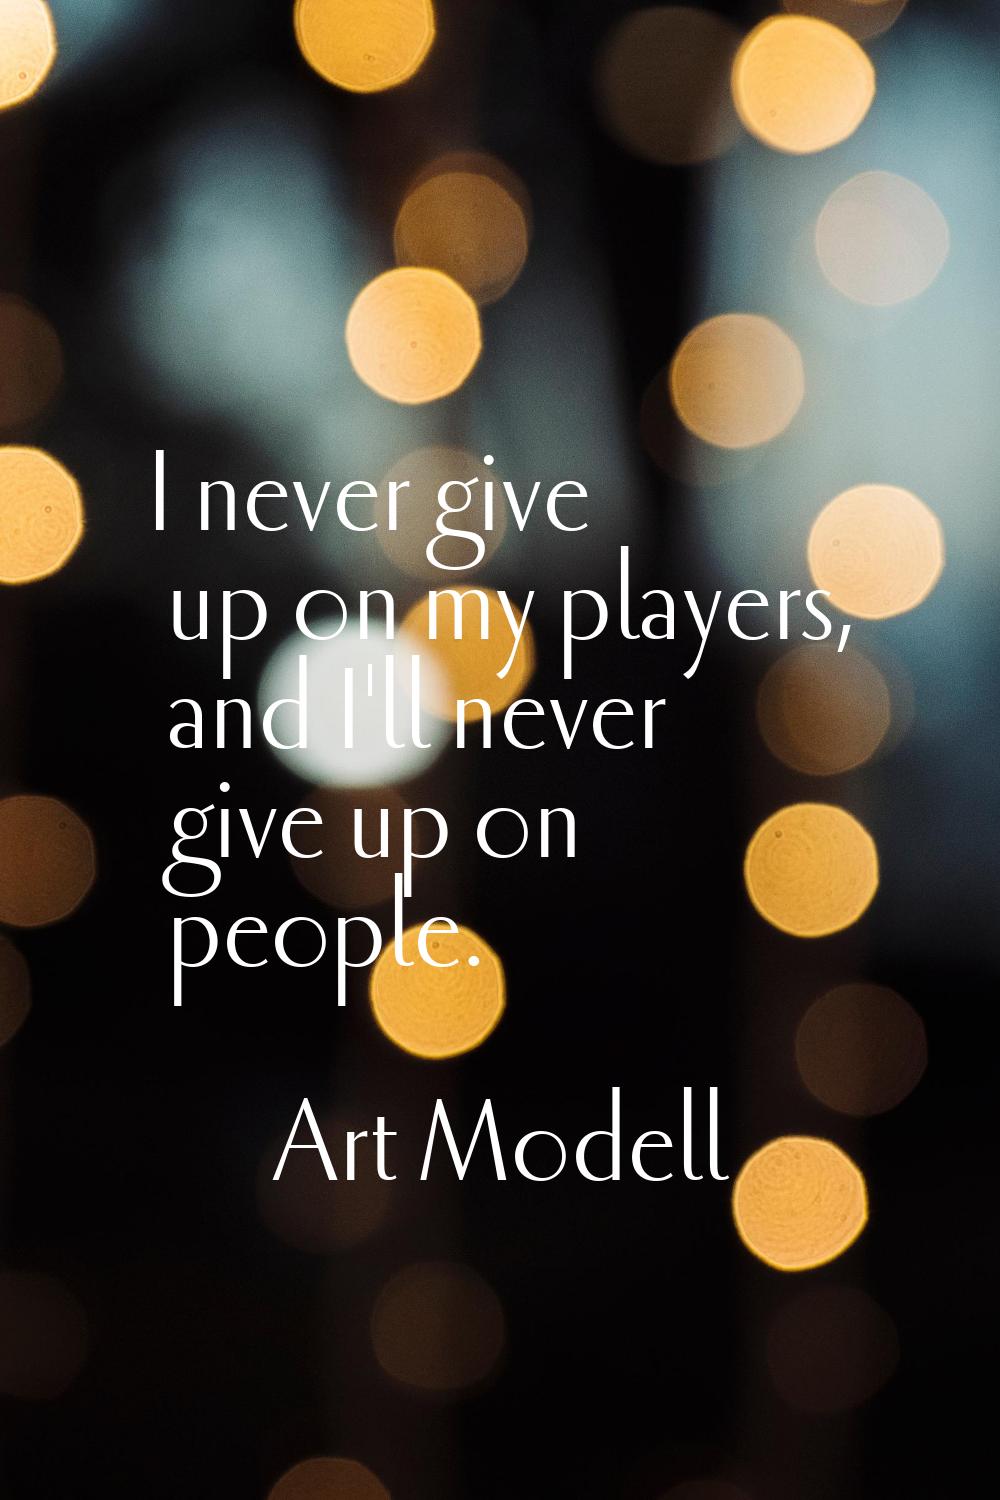 I never give up on my players, and I'll never give up on people.